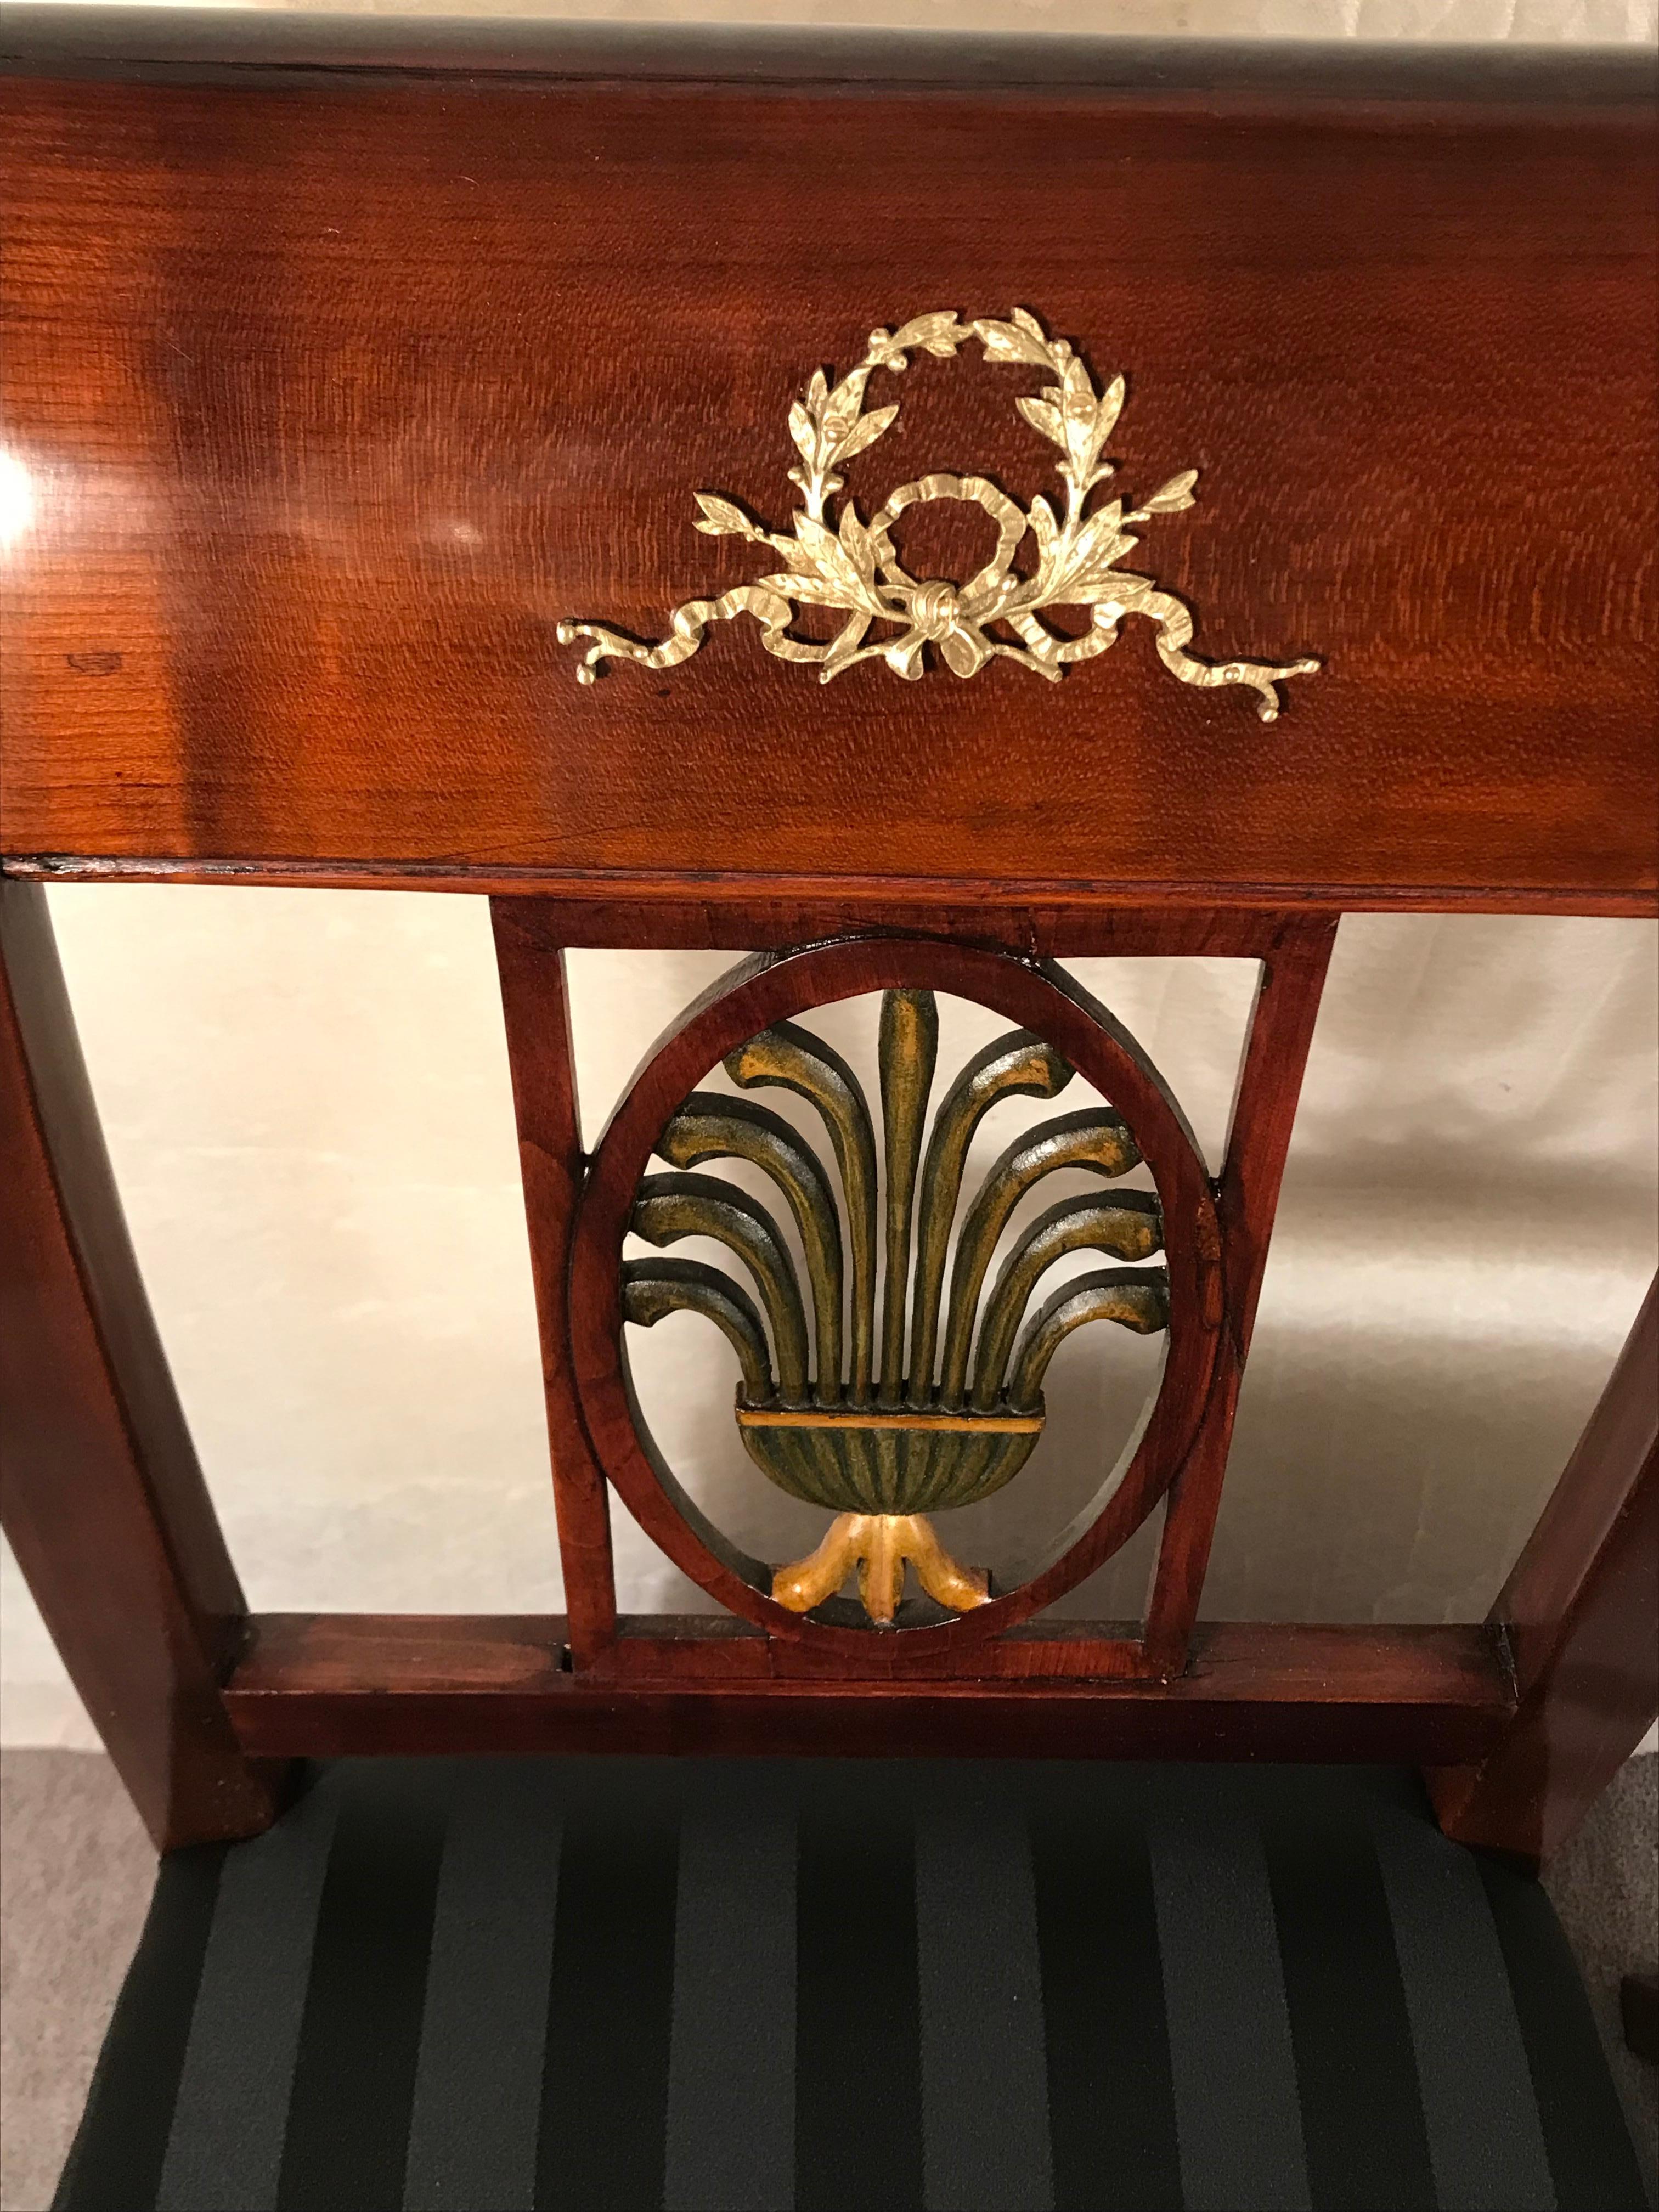 This pair of Neoclassical chairs dates back to the beginning of the 19th century. They have a very pretty backrest, with an open work decor. Additionally, they are embellished with matching brass fittings. The chairs have been professionally